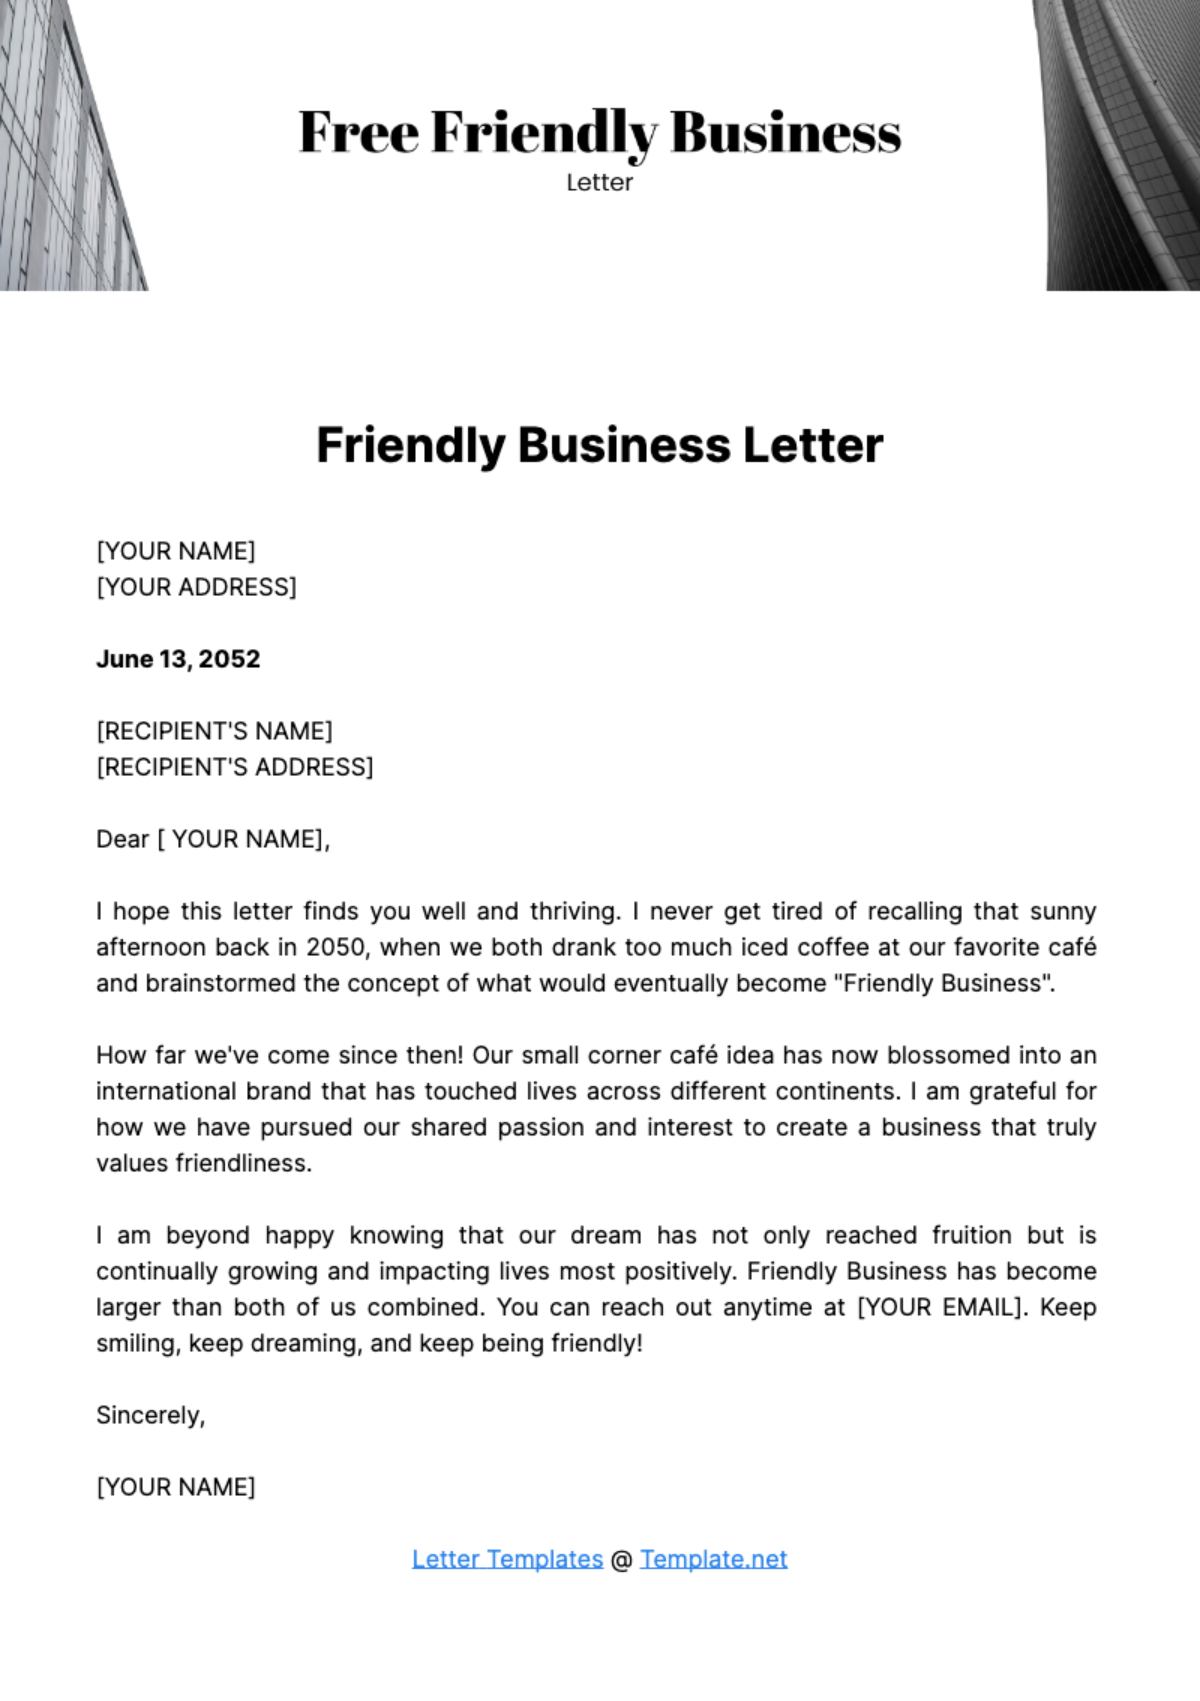 Friendly Business Letter Template